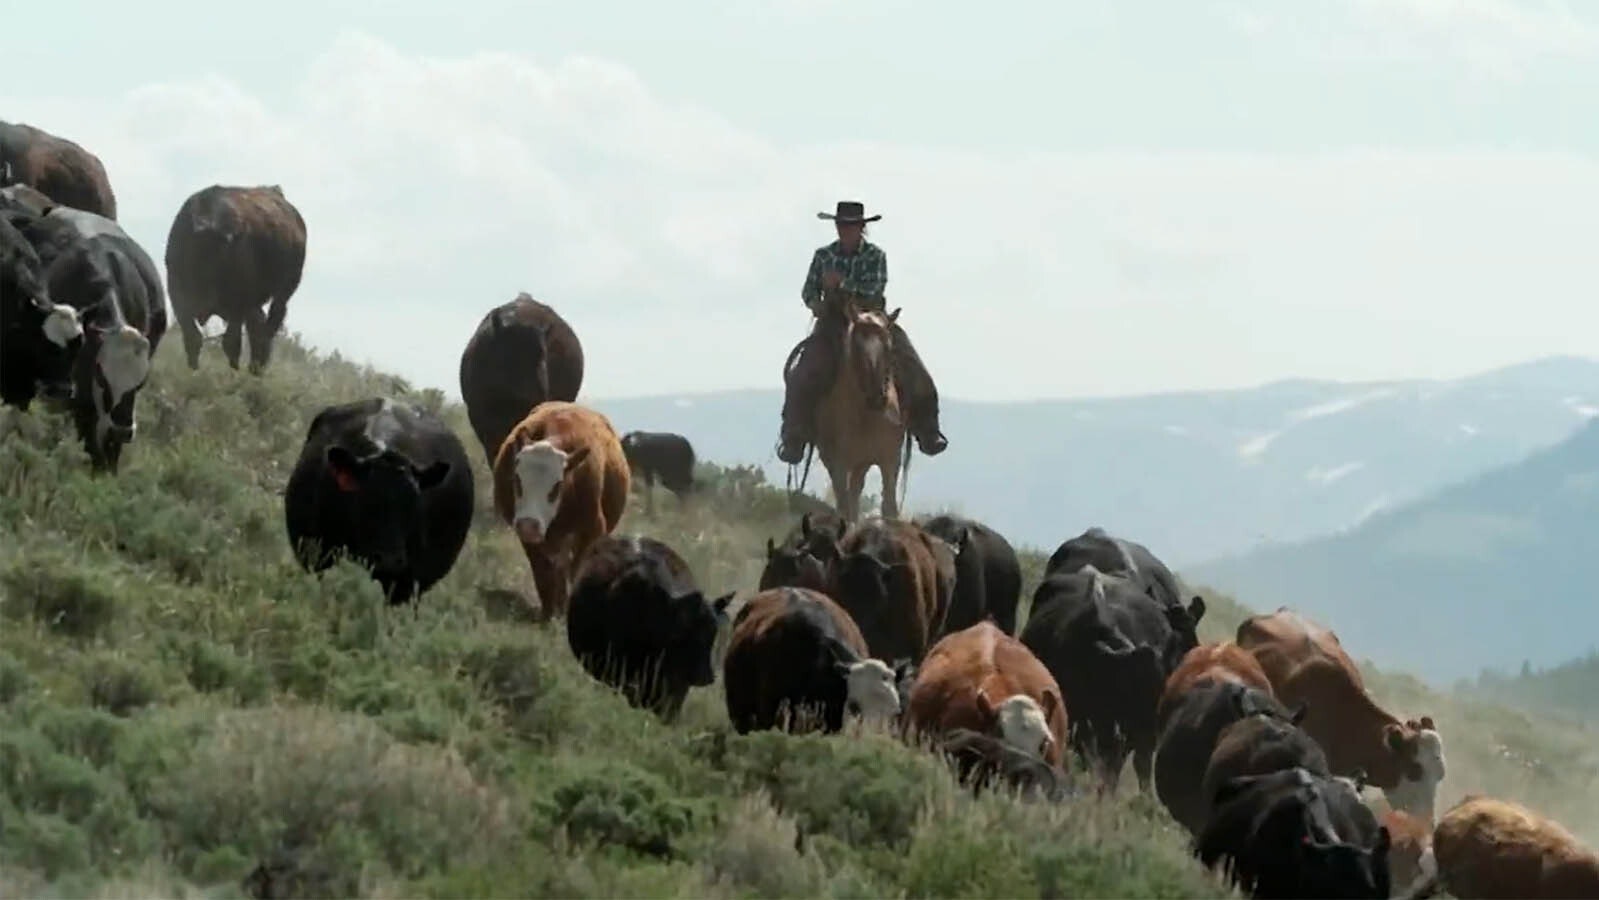 Brittany Heseltine runs cattle along the range during an interview with "60 Minutes."